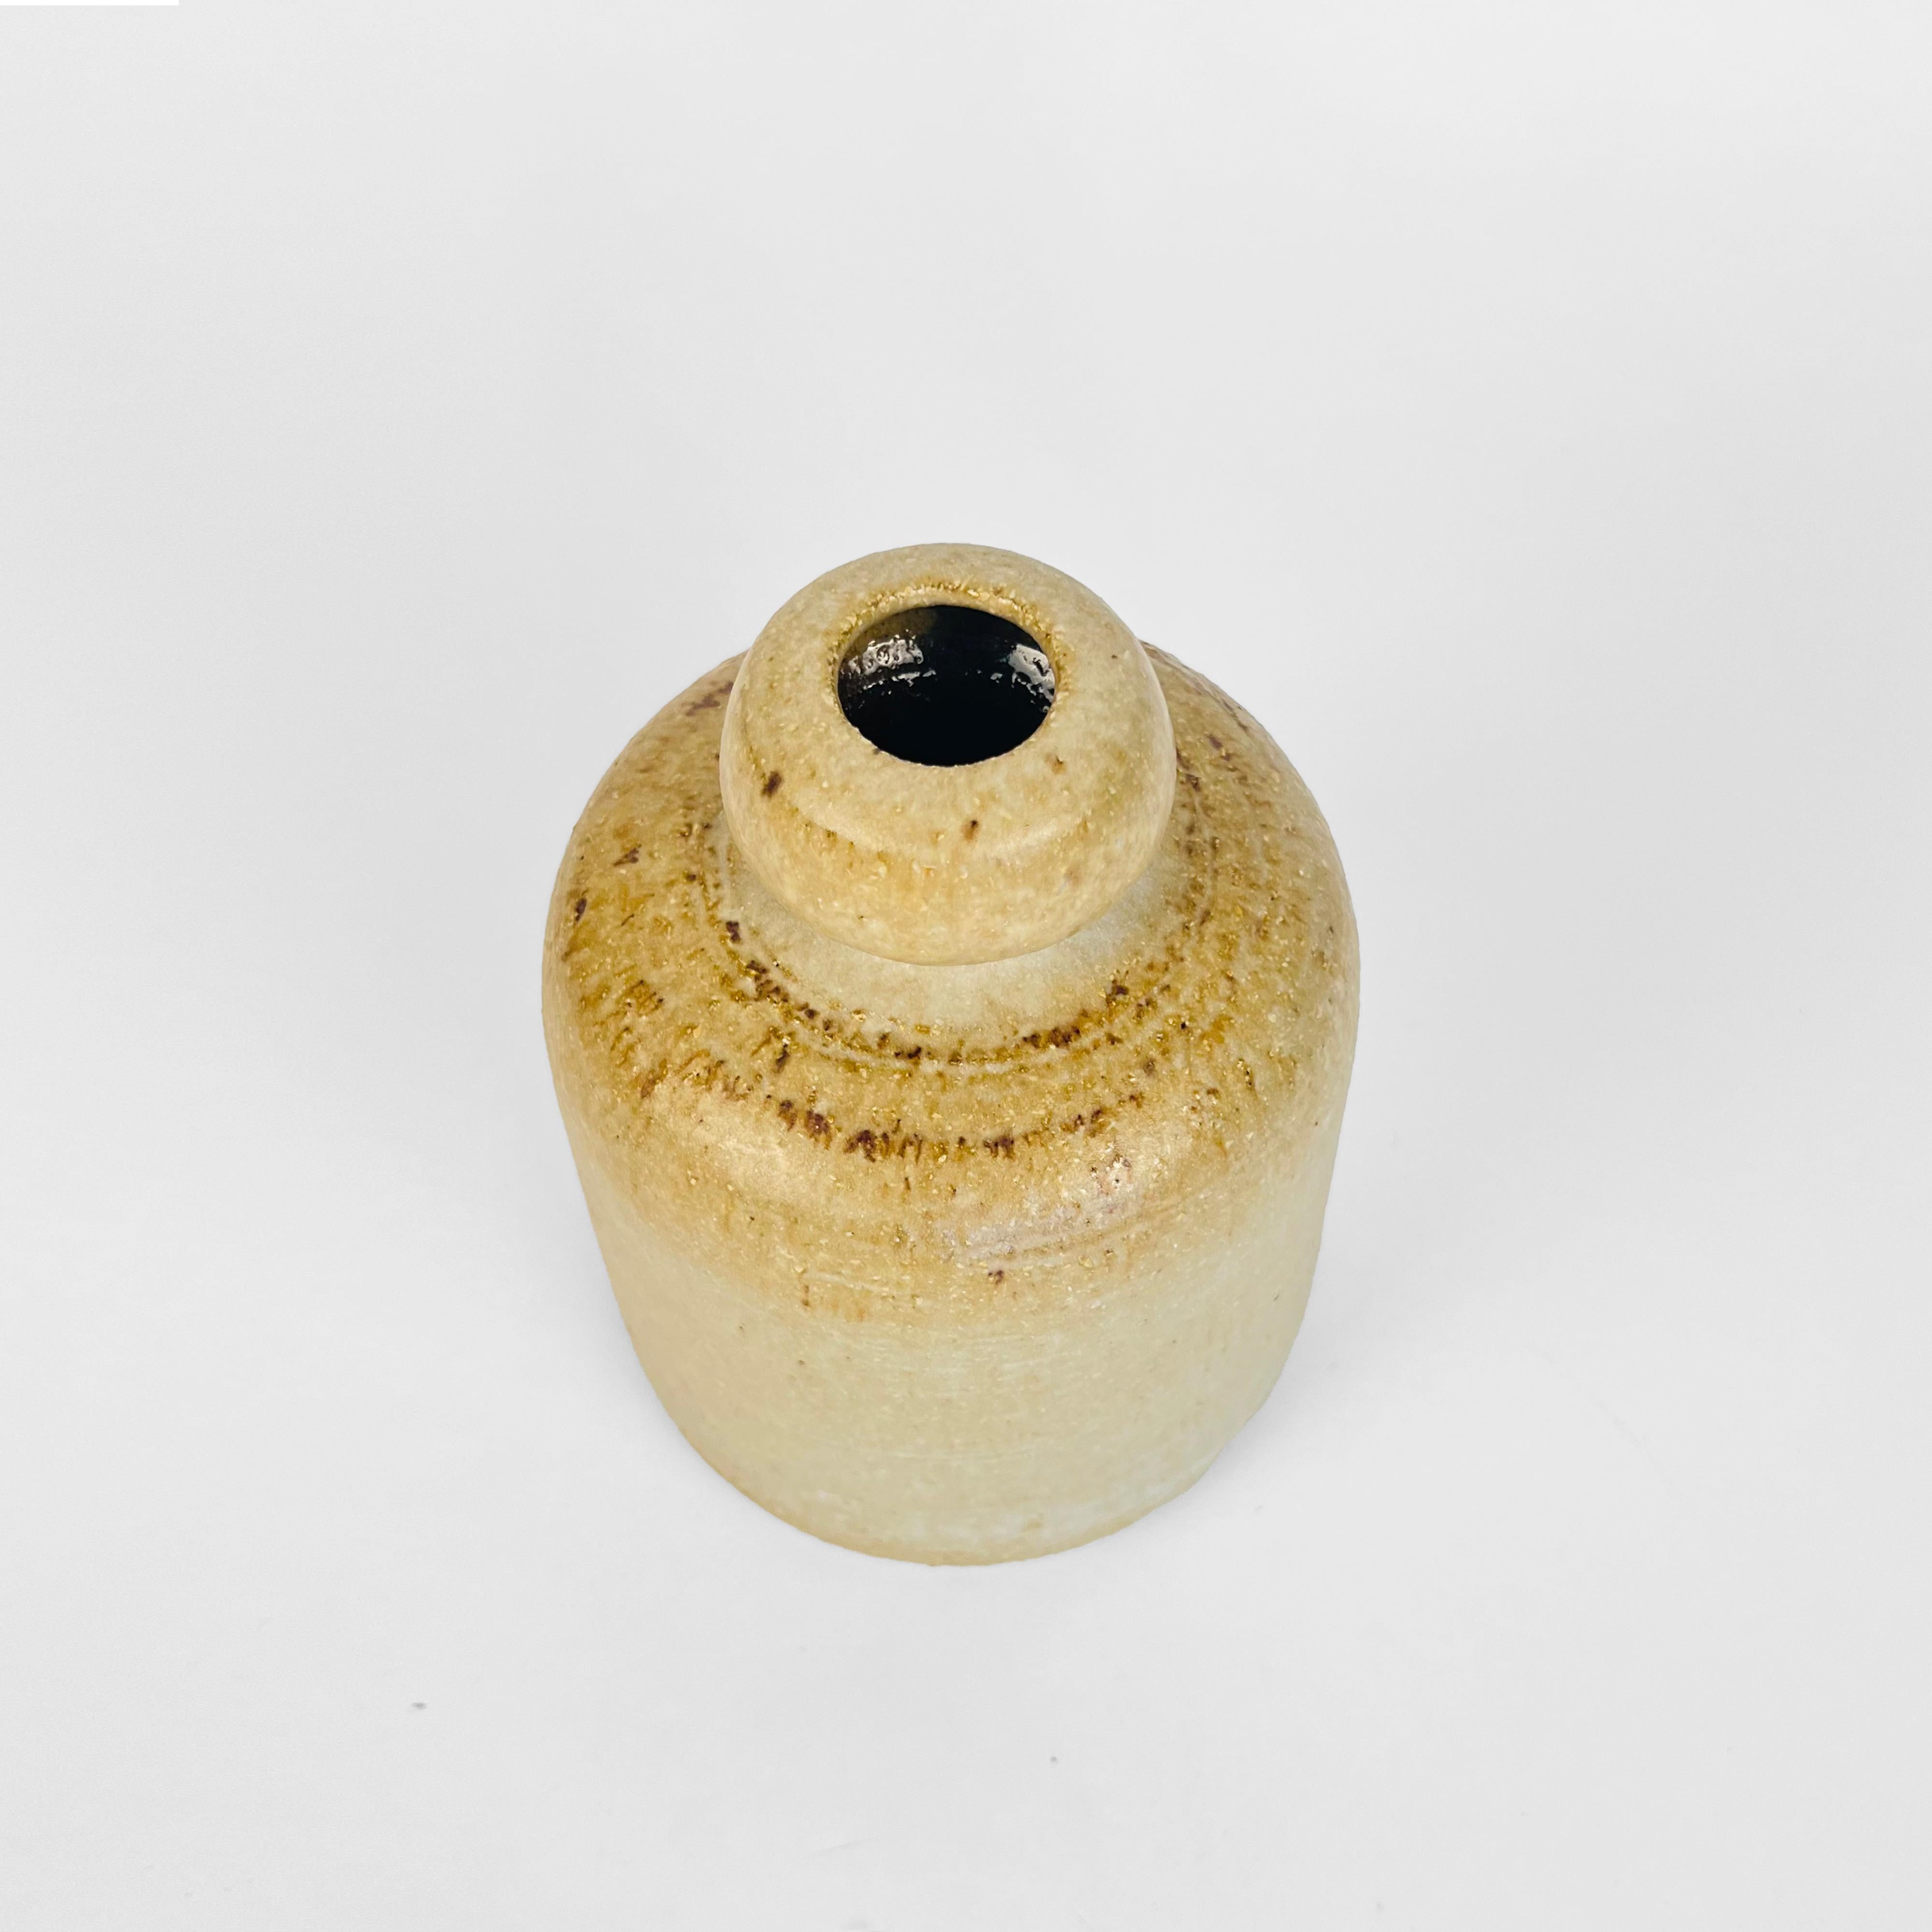 Abstract Ceramic Studio Pottery Vase by Rudi Stahl, Germany 1970s In Good Condition For Sale In Philadelphia, PA